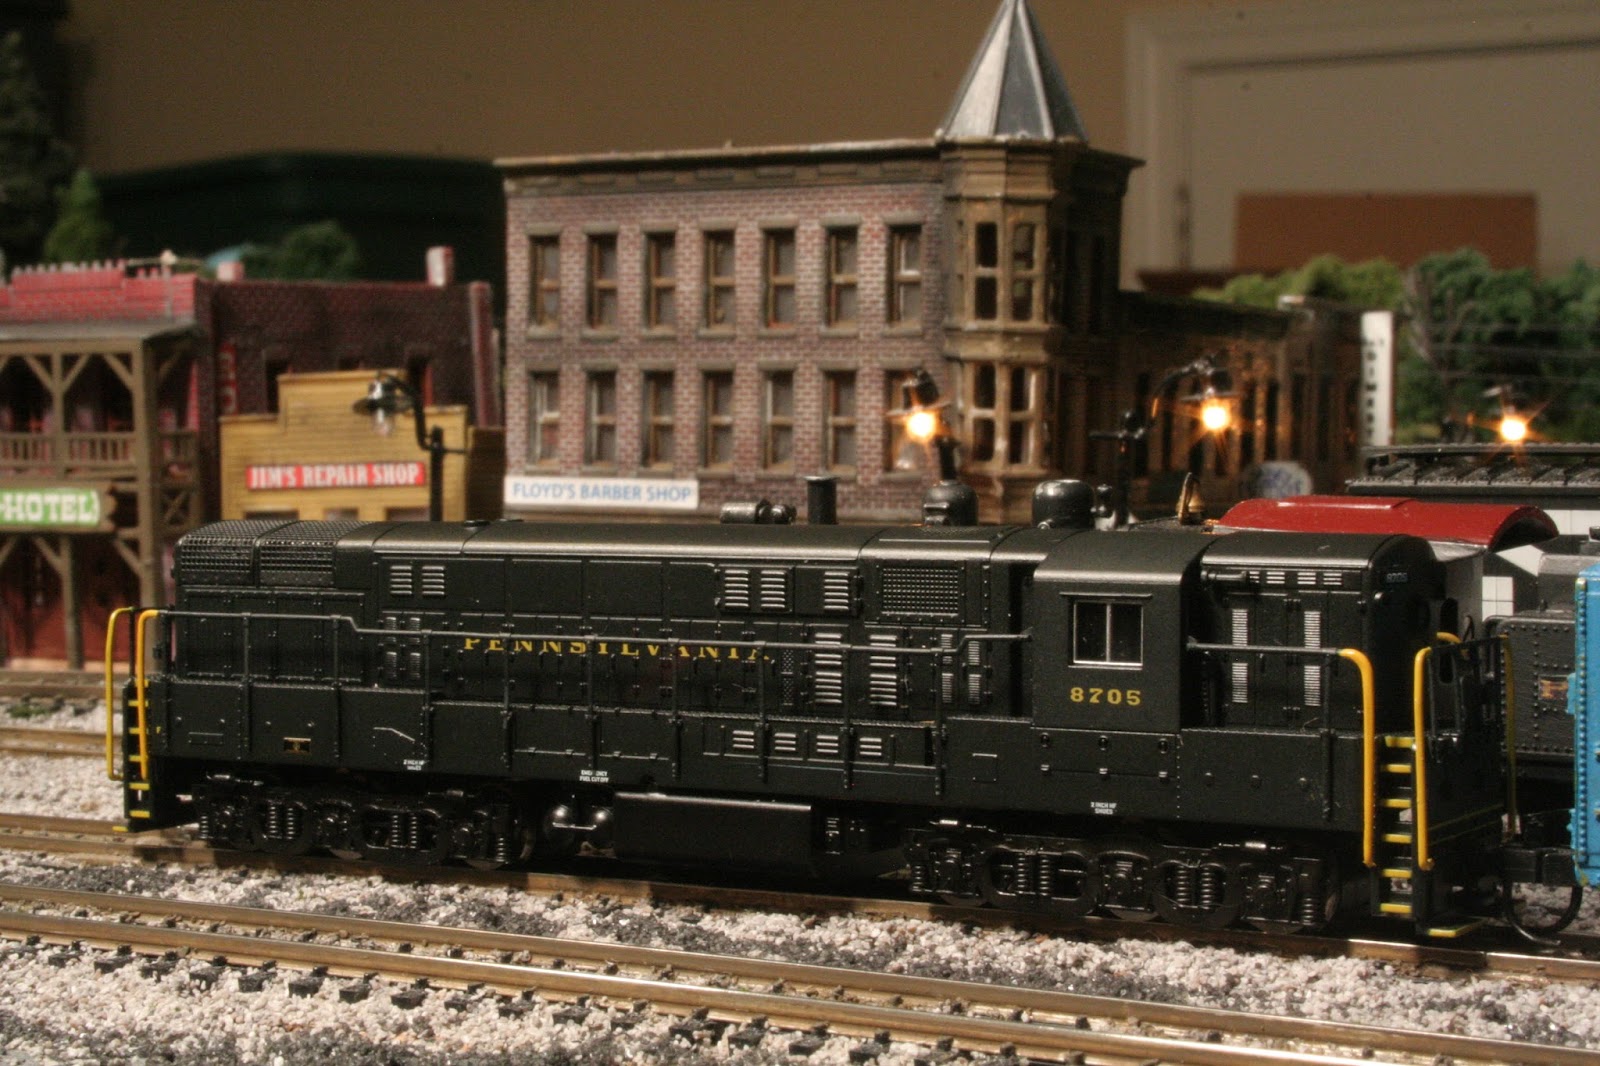 The Pennsylvania Railroad Pittsburgh Division: Expanding the Pennsy Roster